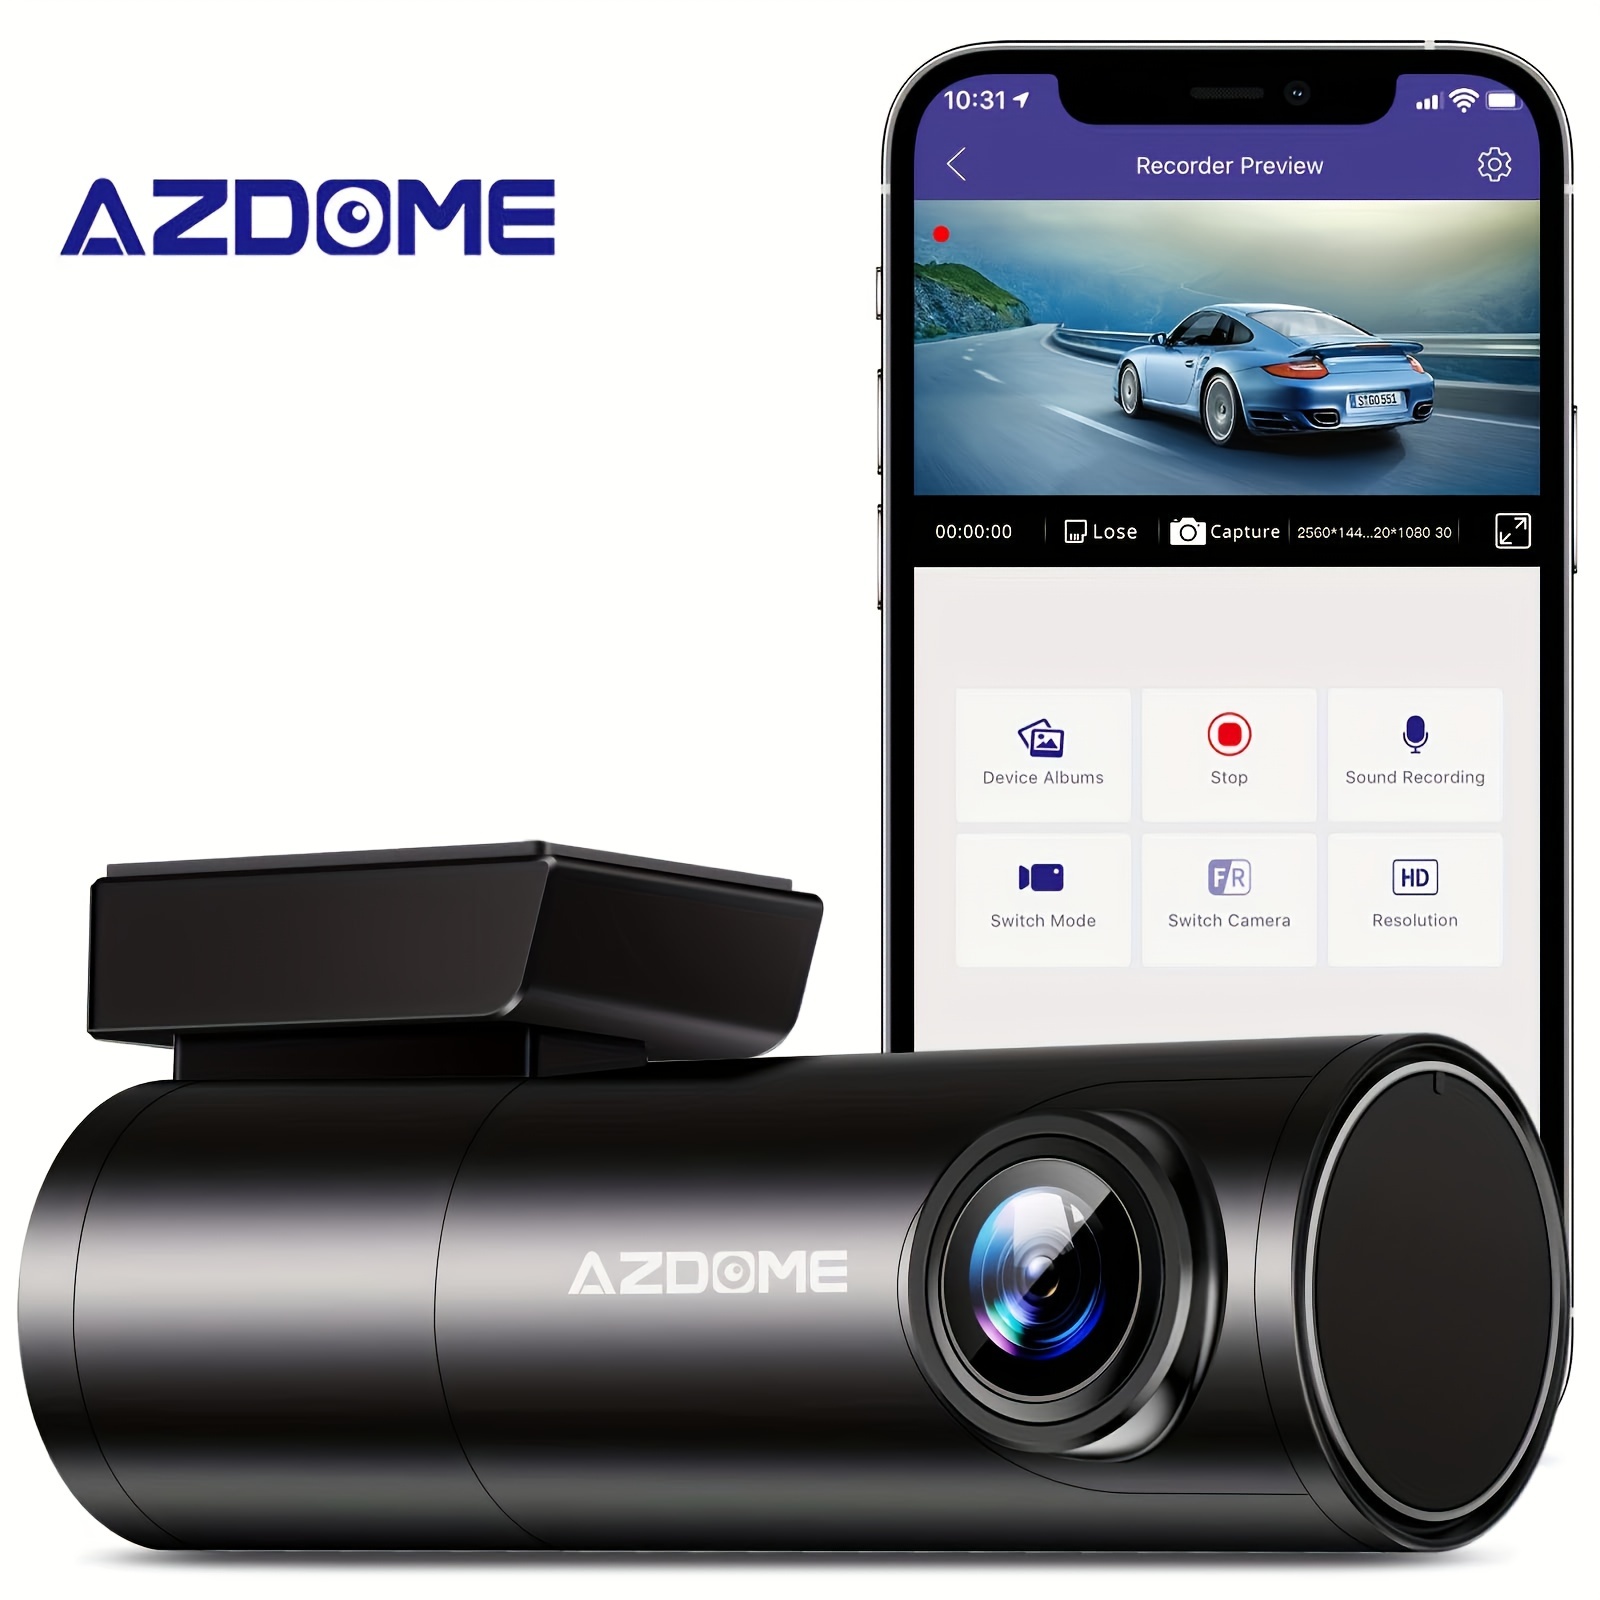 AZDOME M550 64GB 3 Lens 3 Channel 4K Dash Camera for sale online